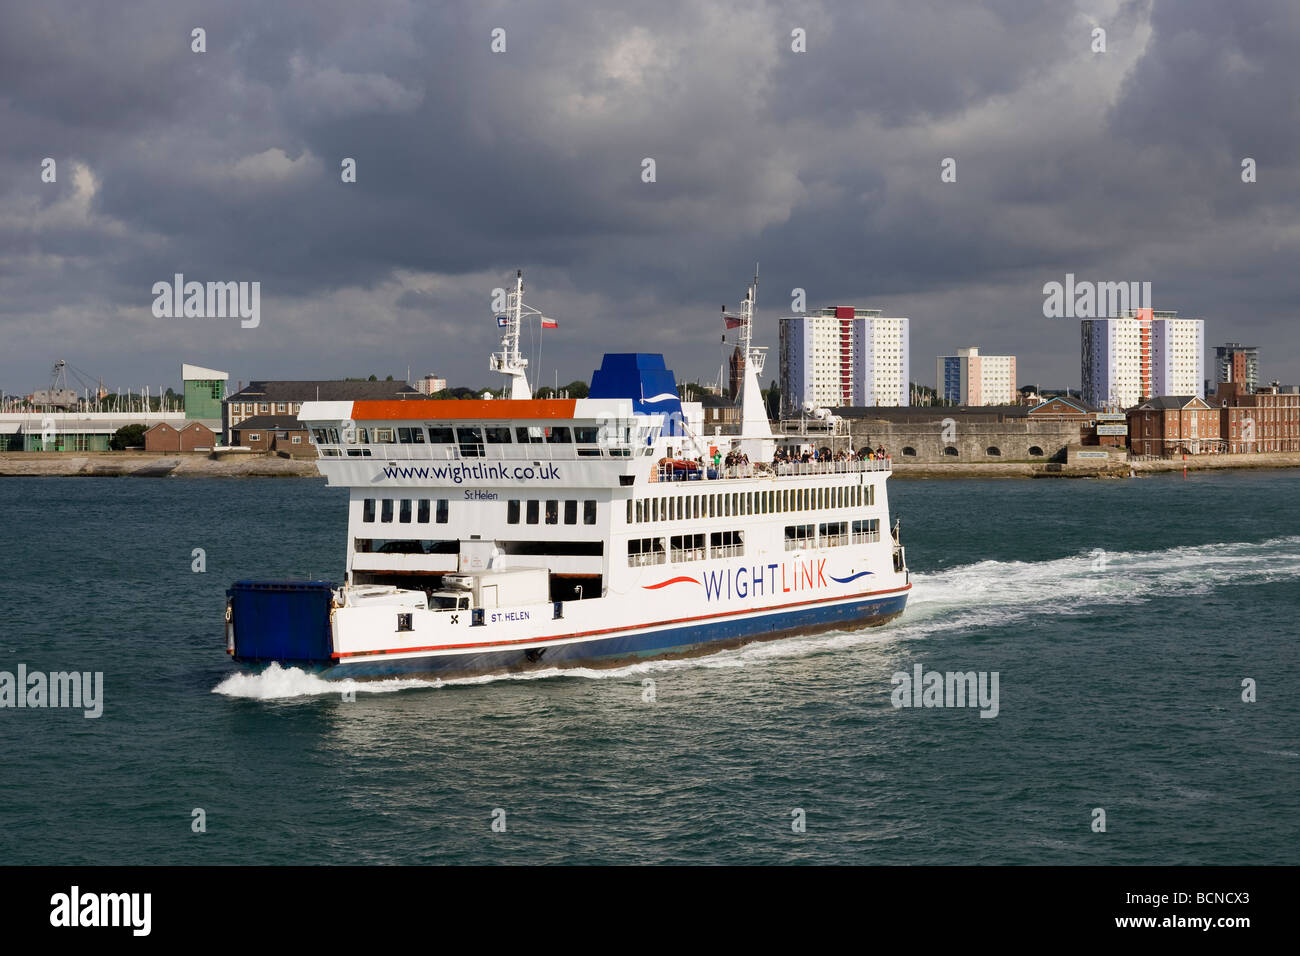 The Wightlink Isle of Wight Ferry St Helen leaving Portsmouth Harbour in early morning sunlight Stock Photo